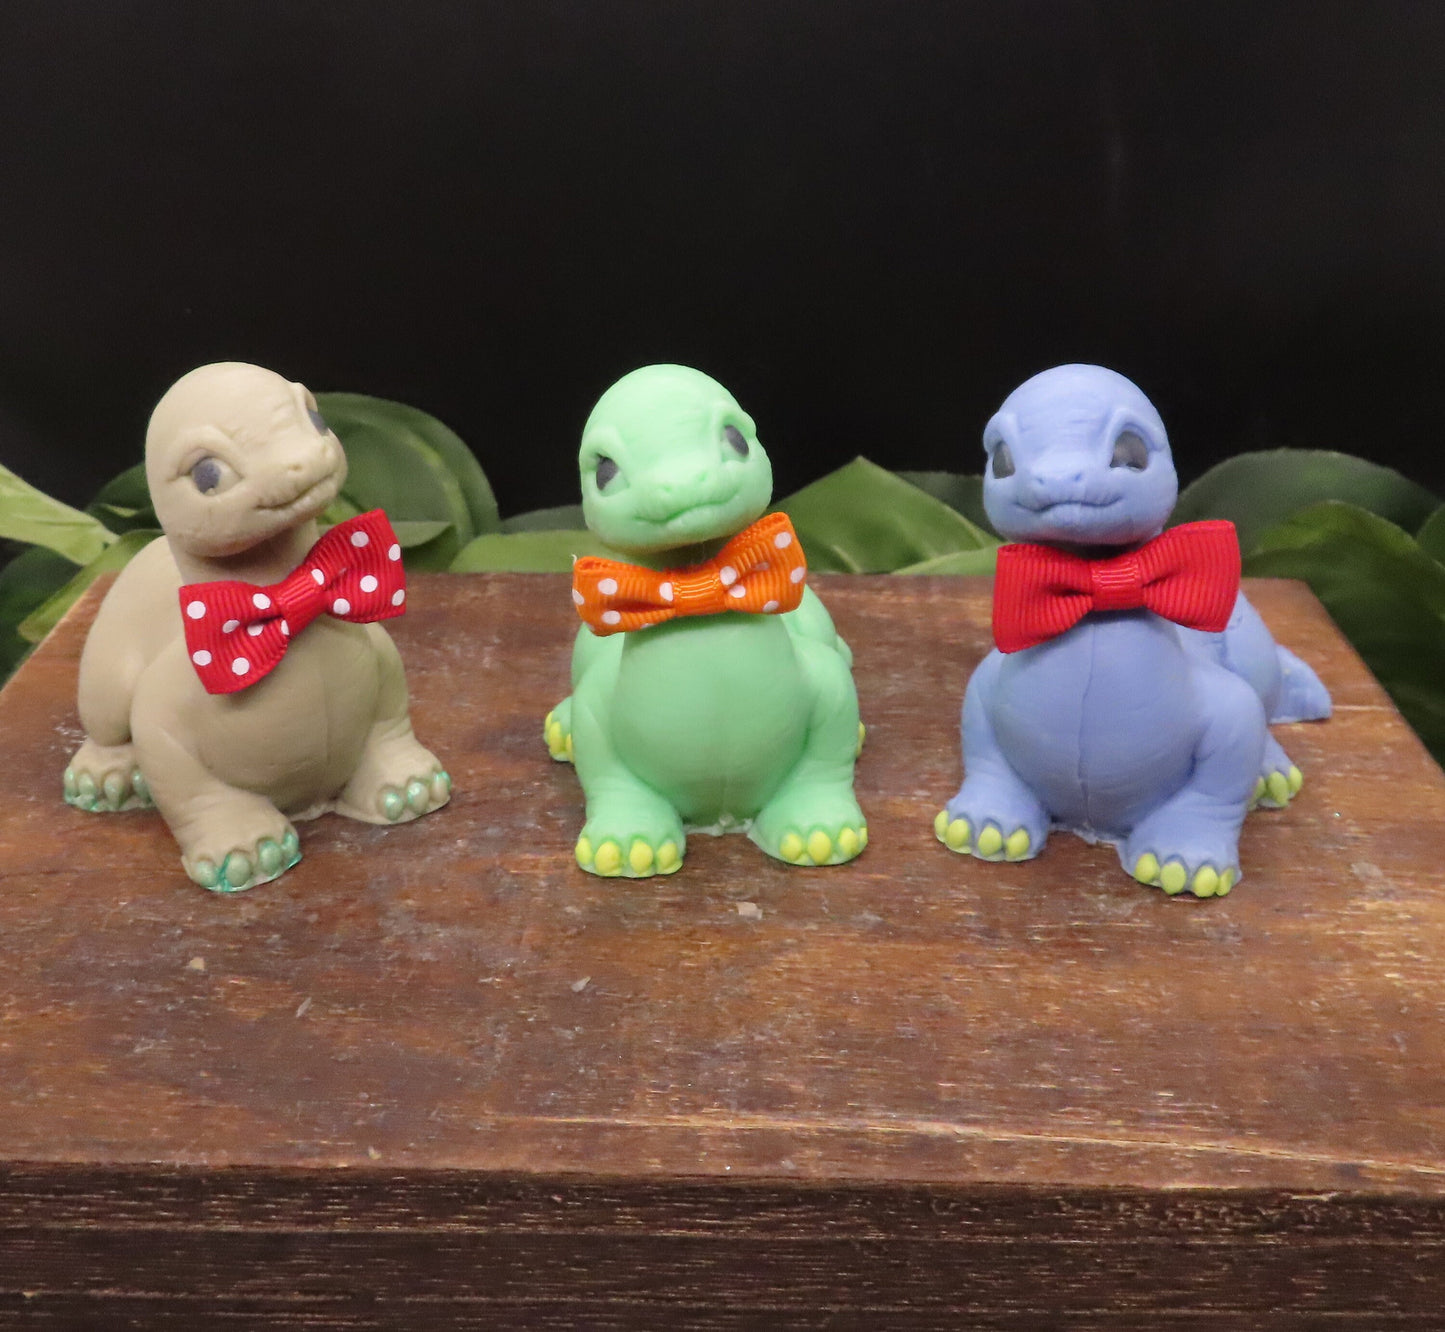 Adorable baby brachiosaurus handmade goat milk soap .  Brown, green and blue versions pictured.  Shown wearing bowties